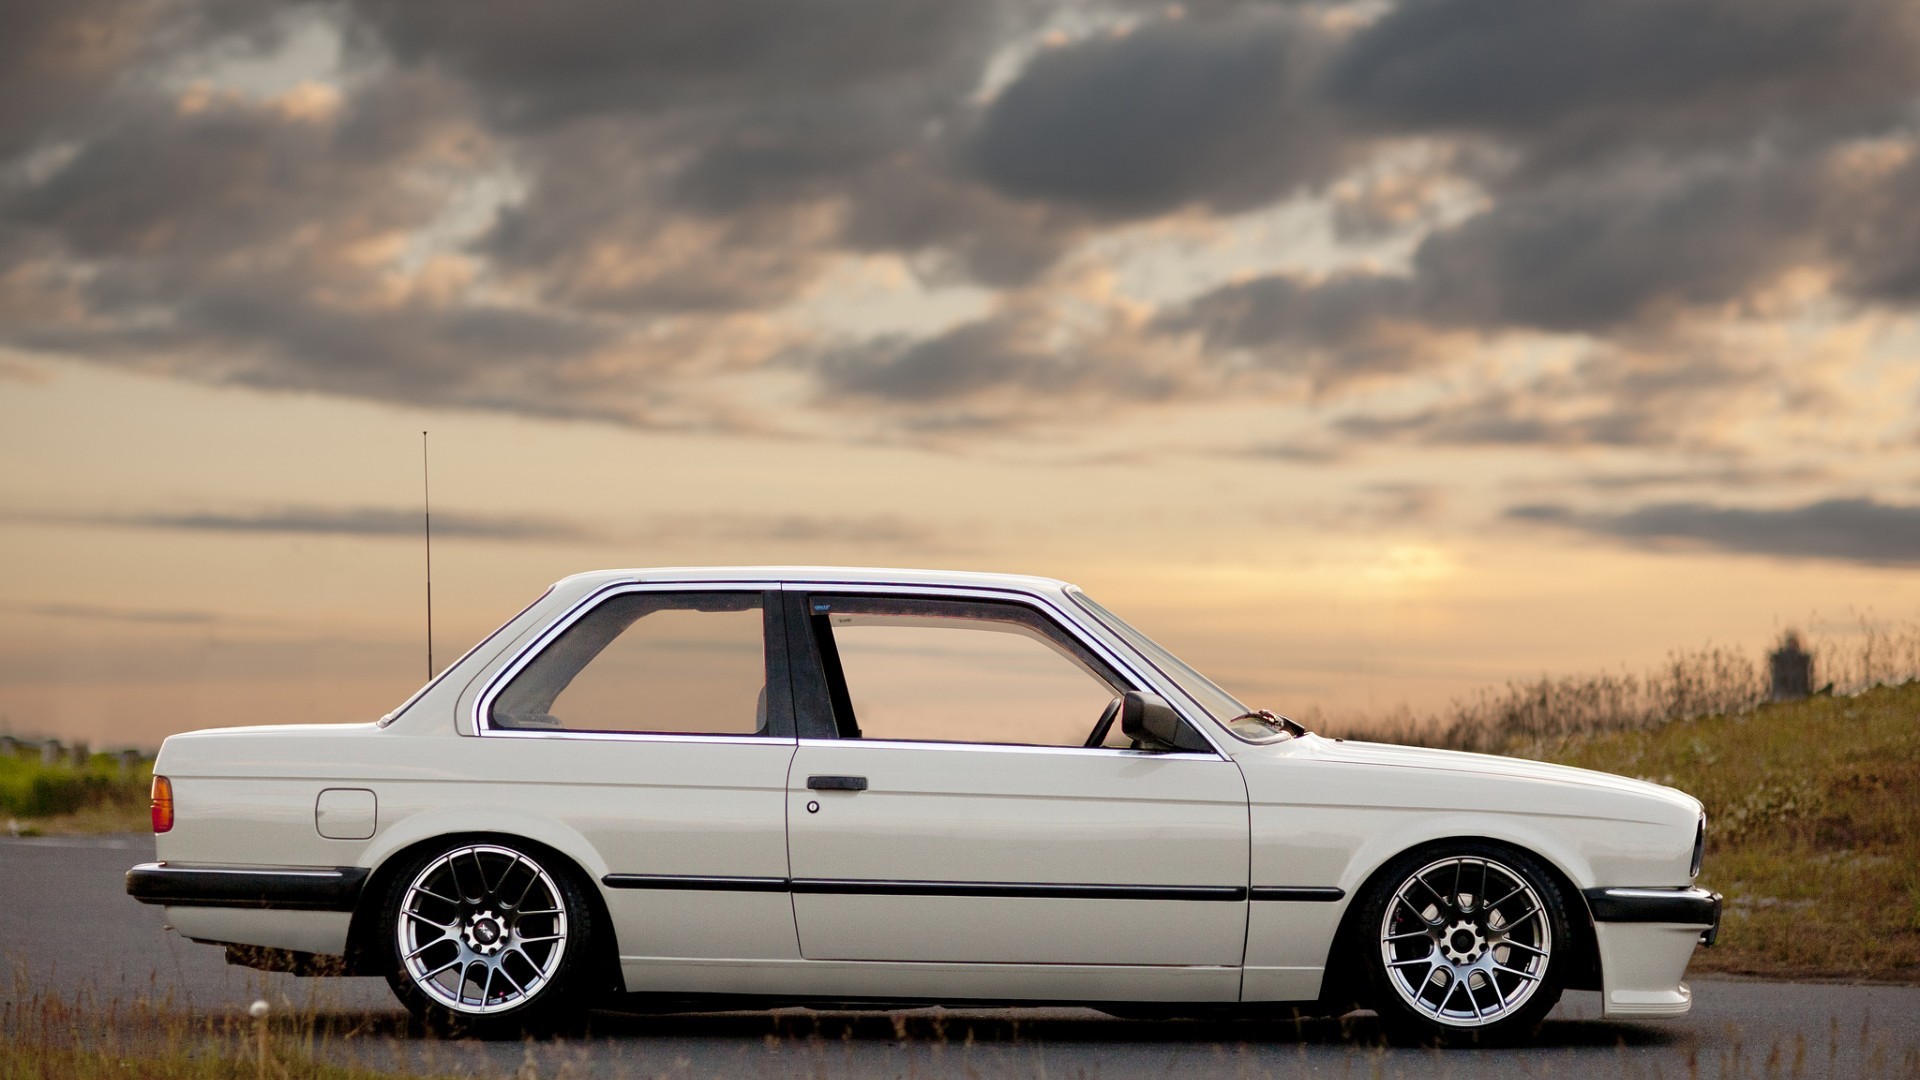 1920x1080 Bmw E30 Full HD Background http://wallpapers-and-backgrounds.net